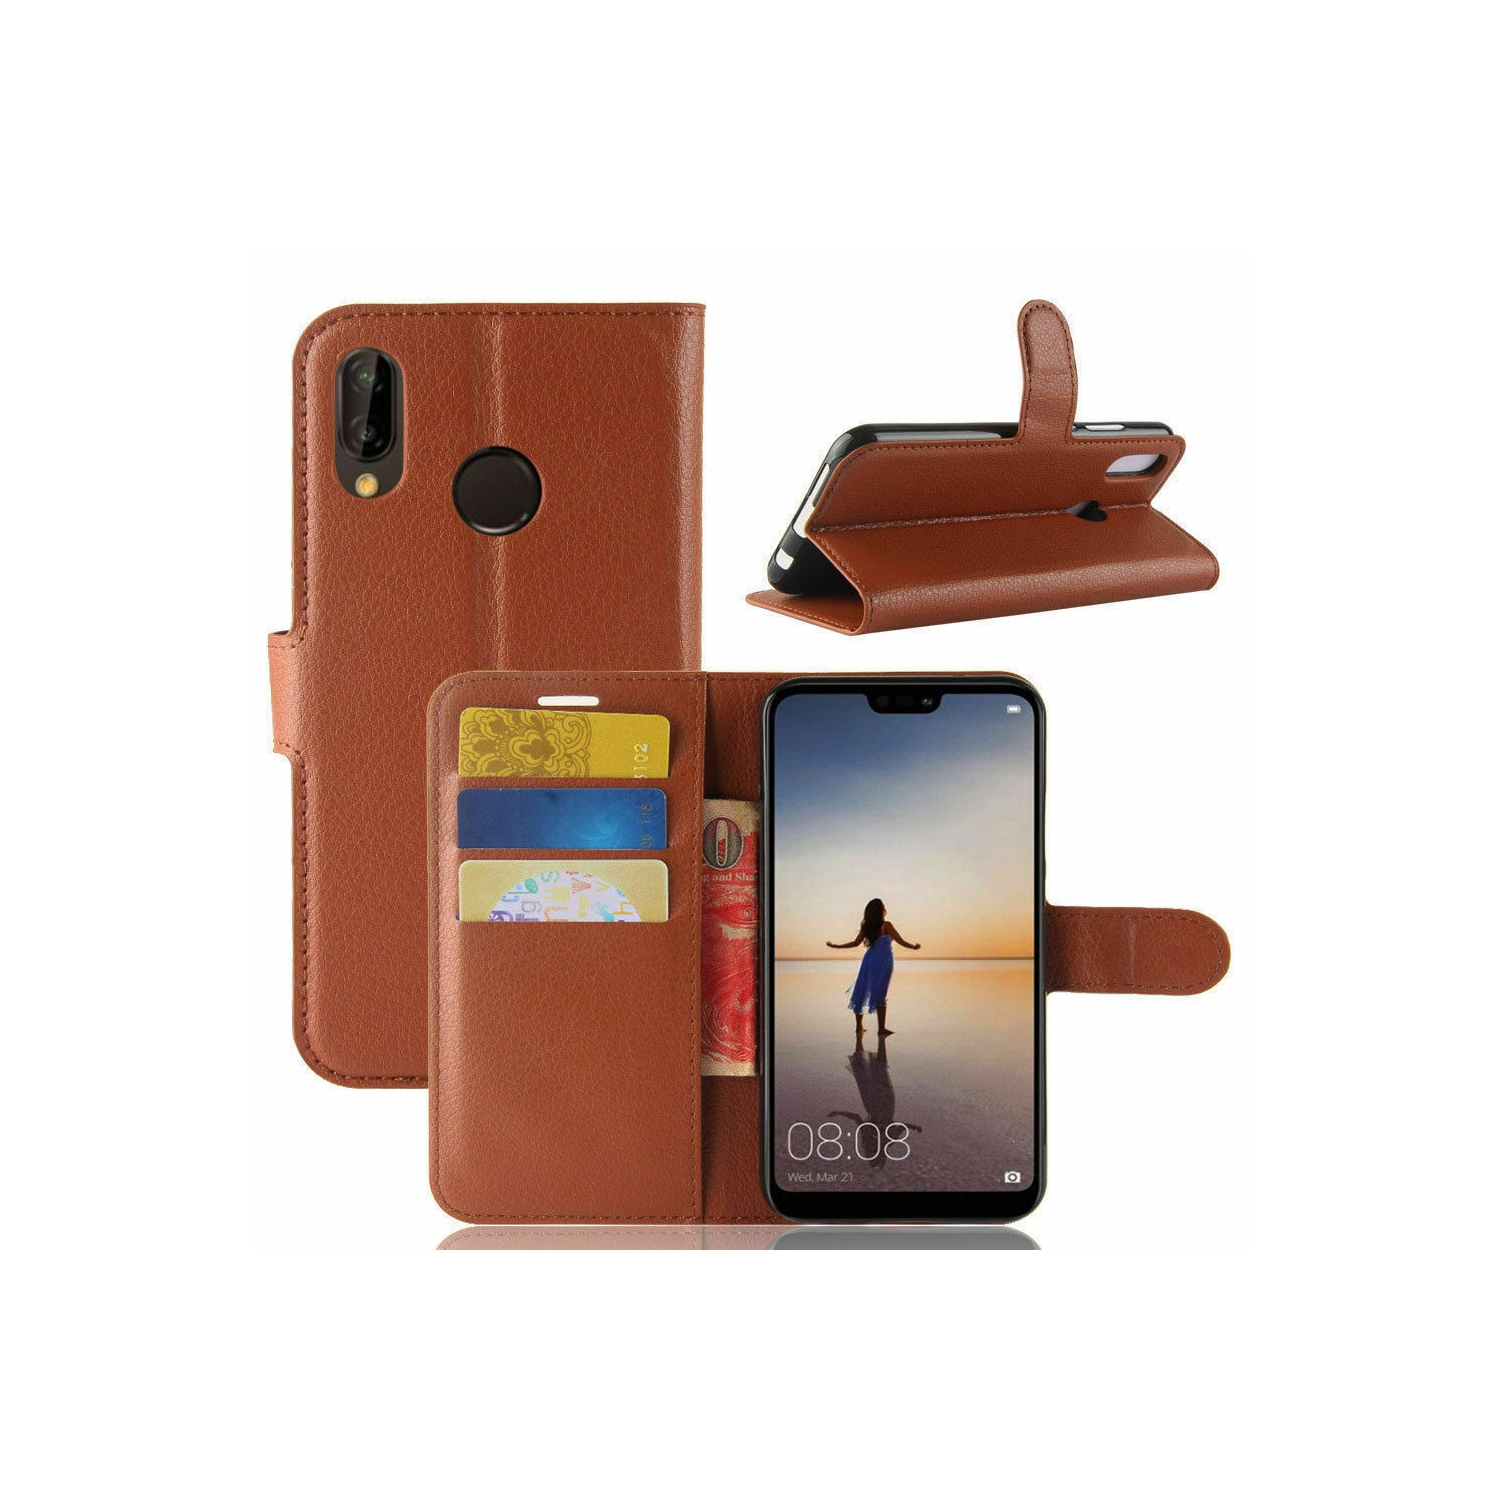 【CSmart】 Magnetic Card Slot Leather Folio Wallet Flip Case Cover for Huawei P20 Lite, Brown